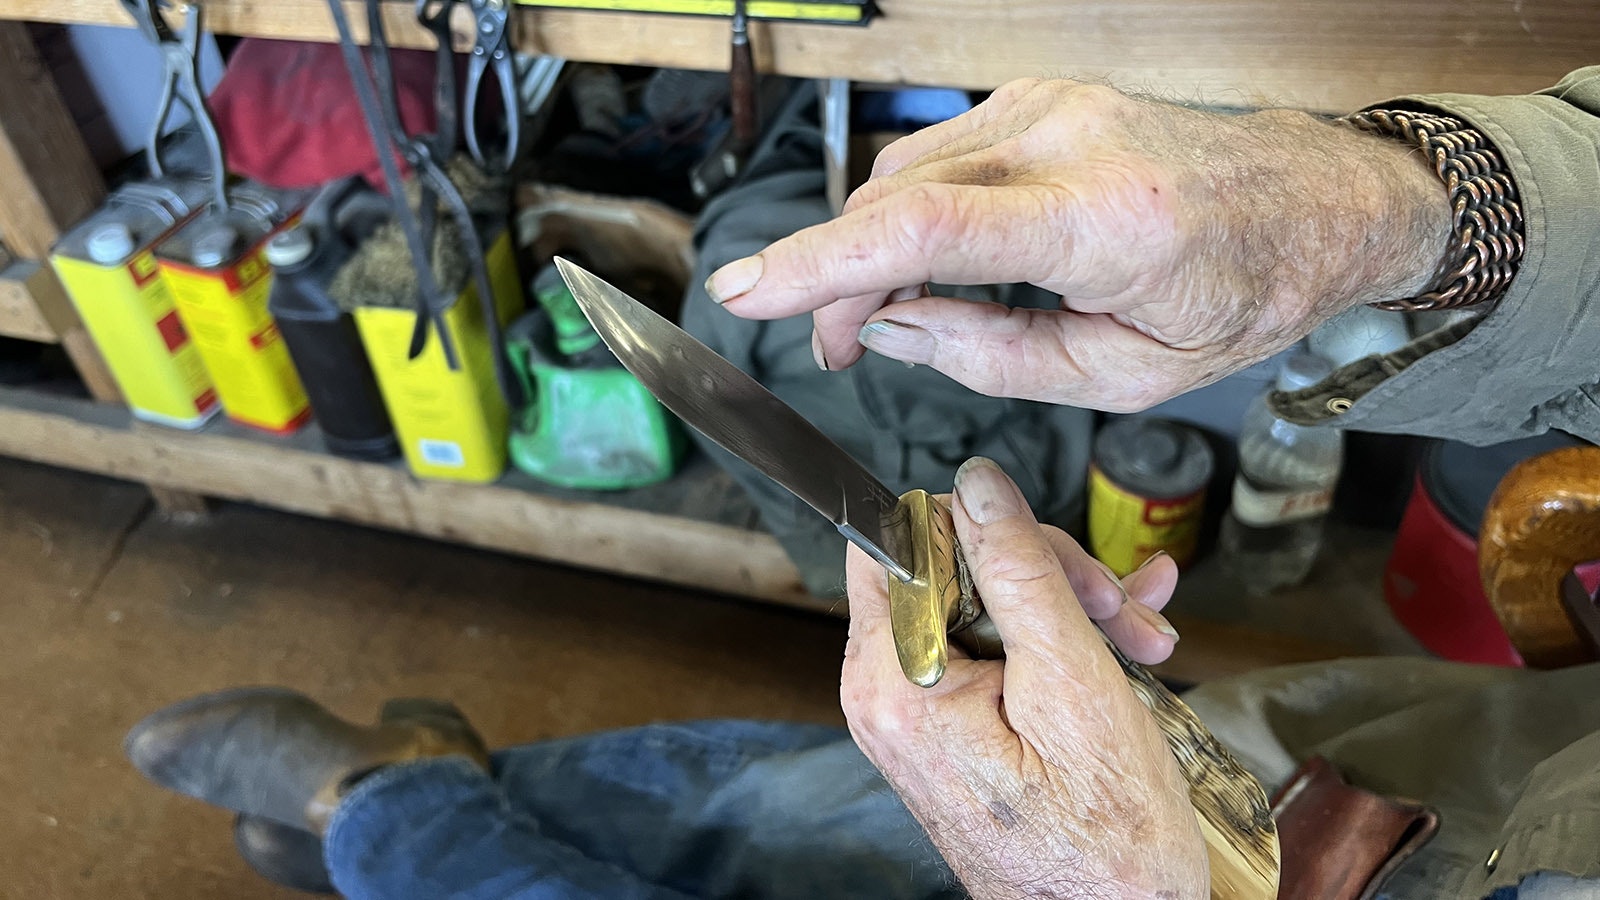 Ed Fowler of Riverton holds a custom-made knife he calls “Starry Night” after the famous Vincent van Gogh painting. He said it’s his pinnacle achievement after decades of forging knives.